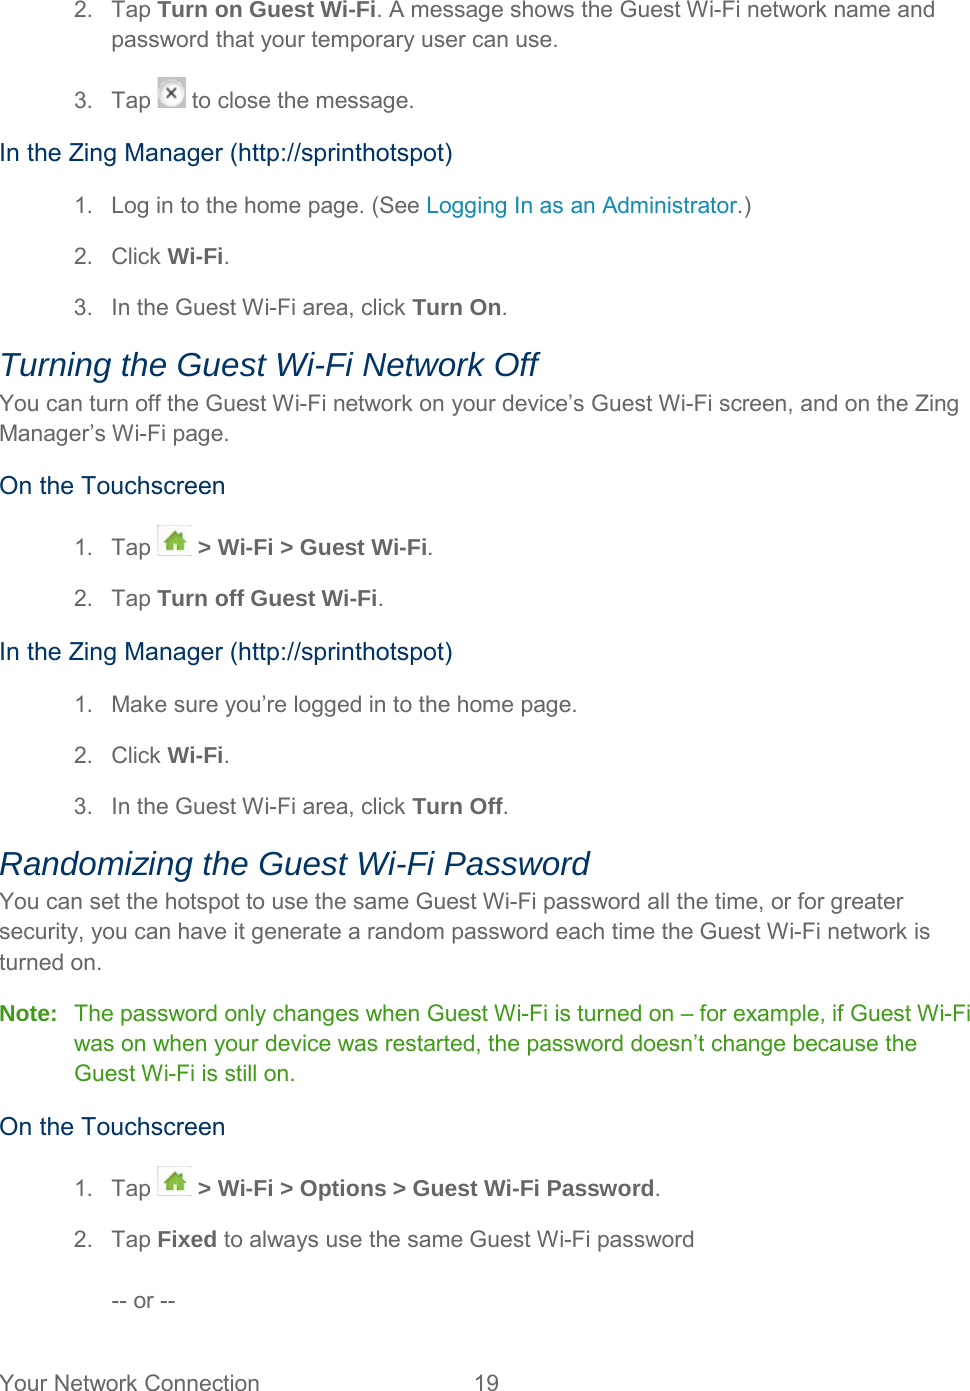 2. Tap Turn on Guest Wi-Fi. A message shows the Guest Wi-Fi network name and password that your temporary user can use. 3. Tap   to close the message. In the Zing Manager (http://sprinthotspot) 1. Log in to the home page. (See Logging In as an Administrator.) 2. Click Wi-Fi. 3. In the Guest Wi-Fi area, click Turn On. Turning the Guest Wi-Fi Network Off You can turn off the Guest Wi-Fi network on your device’s Guest Wi-Fi screen, and on the Zing Manager’s Wi-Fi page. On the Touchscreen 1. Tap  &gt; Wi-Fi &gt; Guest Wi-Fi. 2. Tap Turn off Guest Wi-Fi. In the Zing Manager (http://sprinthotspot) 1. Make sure you’re logged in to the home page. 2. Click Wi-Fi. 3. In the Guest Wi-Fi area, click Turn Off. Randomizing the Guest Wi-Fi Password You can set the hotspot to use the same Guest Wi-Fi password all the time, or for greater security, you can have it generate a random password each time the Guest Wi-Fi network is turned on. Note: The password only changes when Guest Wi-Fi is turned on – for example, if Guest Wi-Fi was on when your device was restarted, the password doesn’t change because the Guest Wi-Fi is still on. On the Touchscreen 1. Tap  &gt; Wi-Fi &gt; Options &gt; Guest Wi-Fi Password. 2. Tap Fixed to always use the same Guest Wi-Fi password  -- or --  Your Network Connection 19   